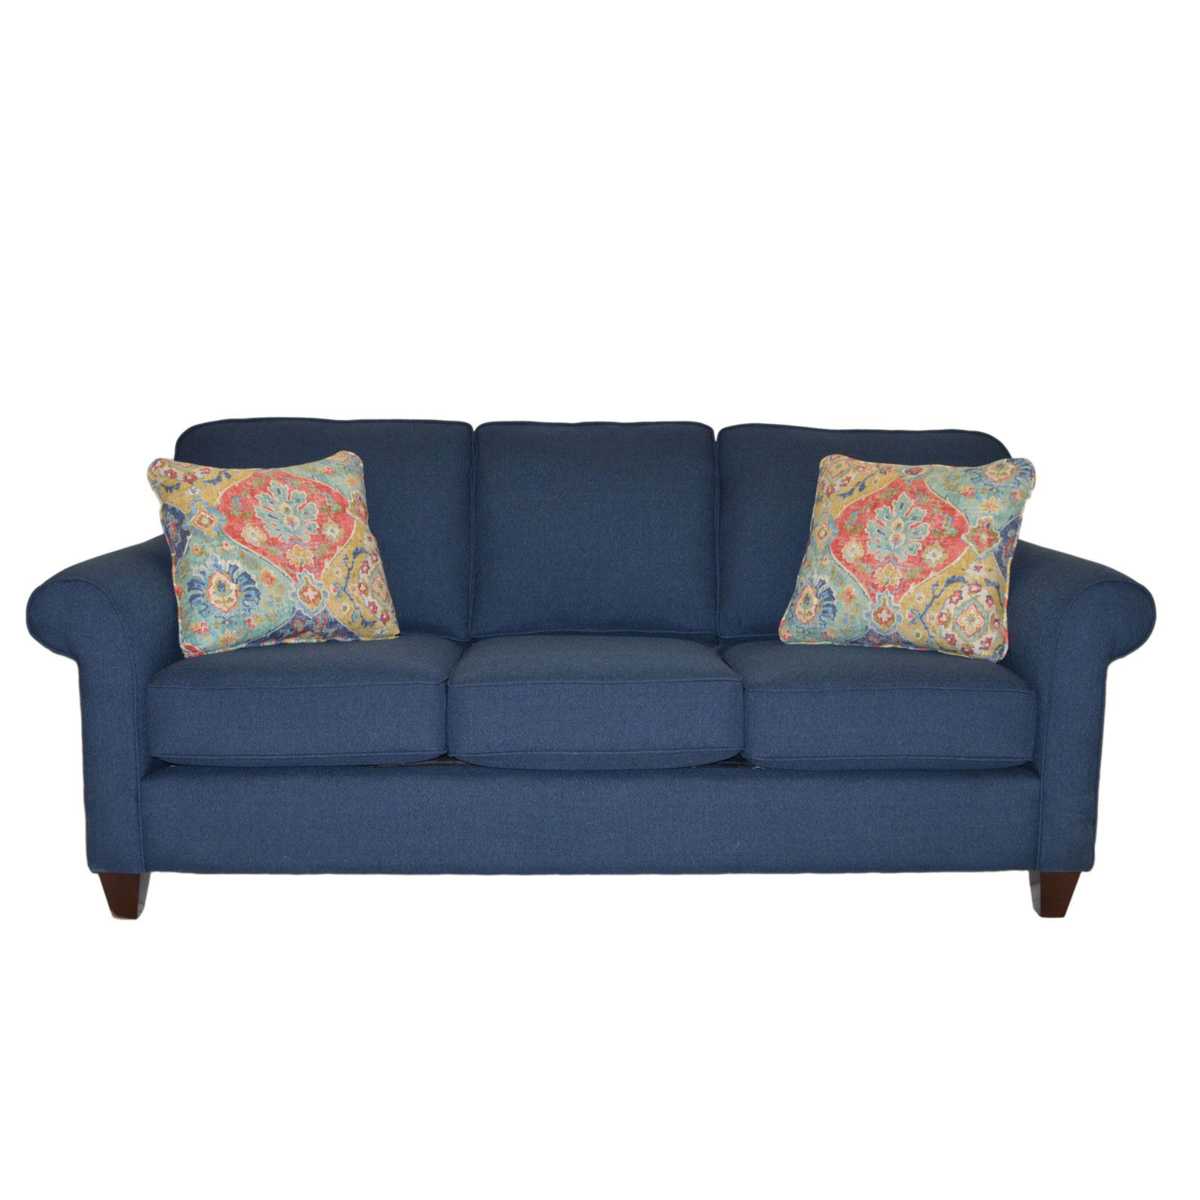 Picture of Macarena Stationary Sofa